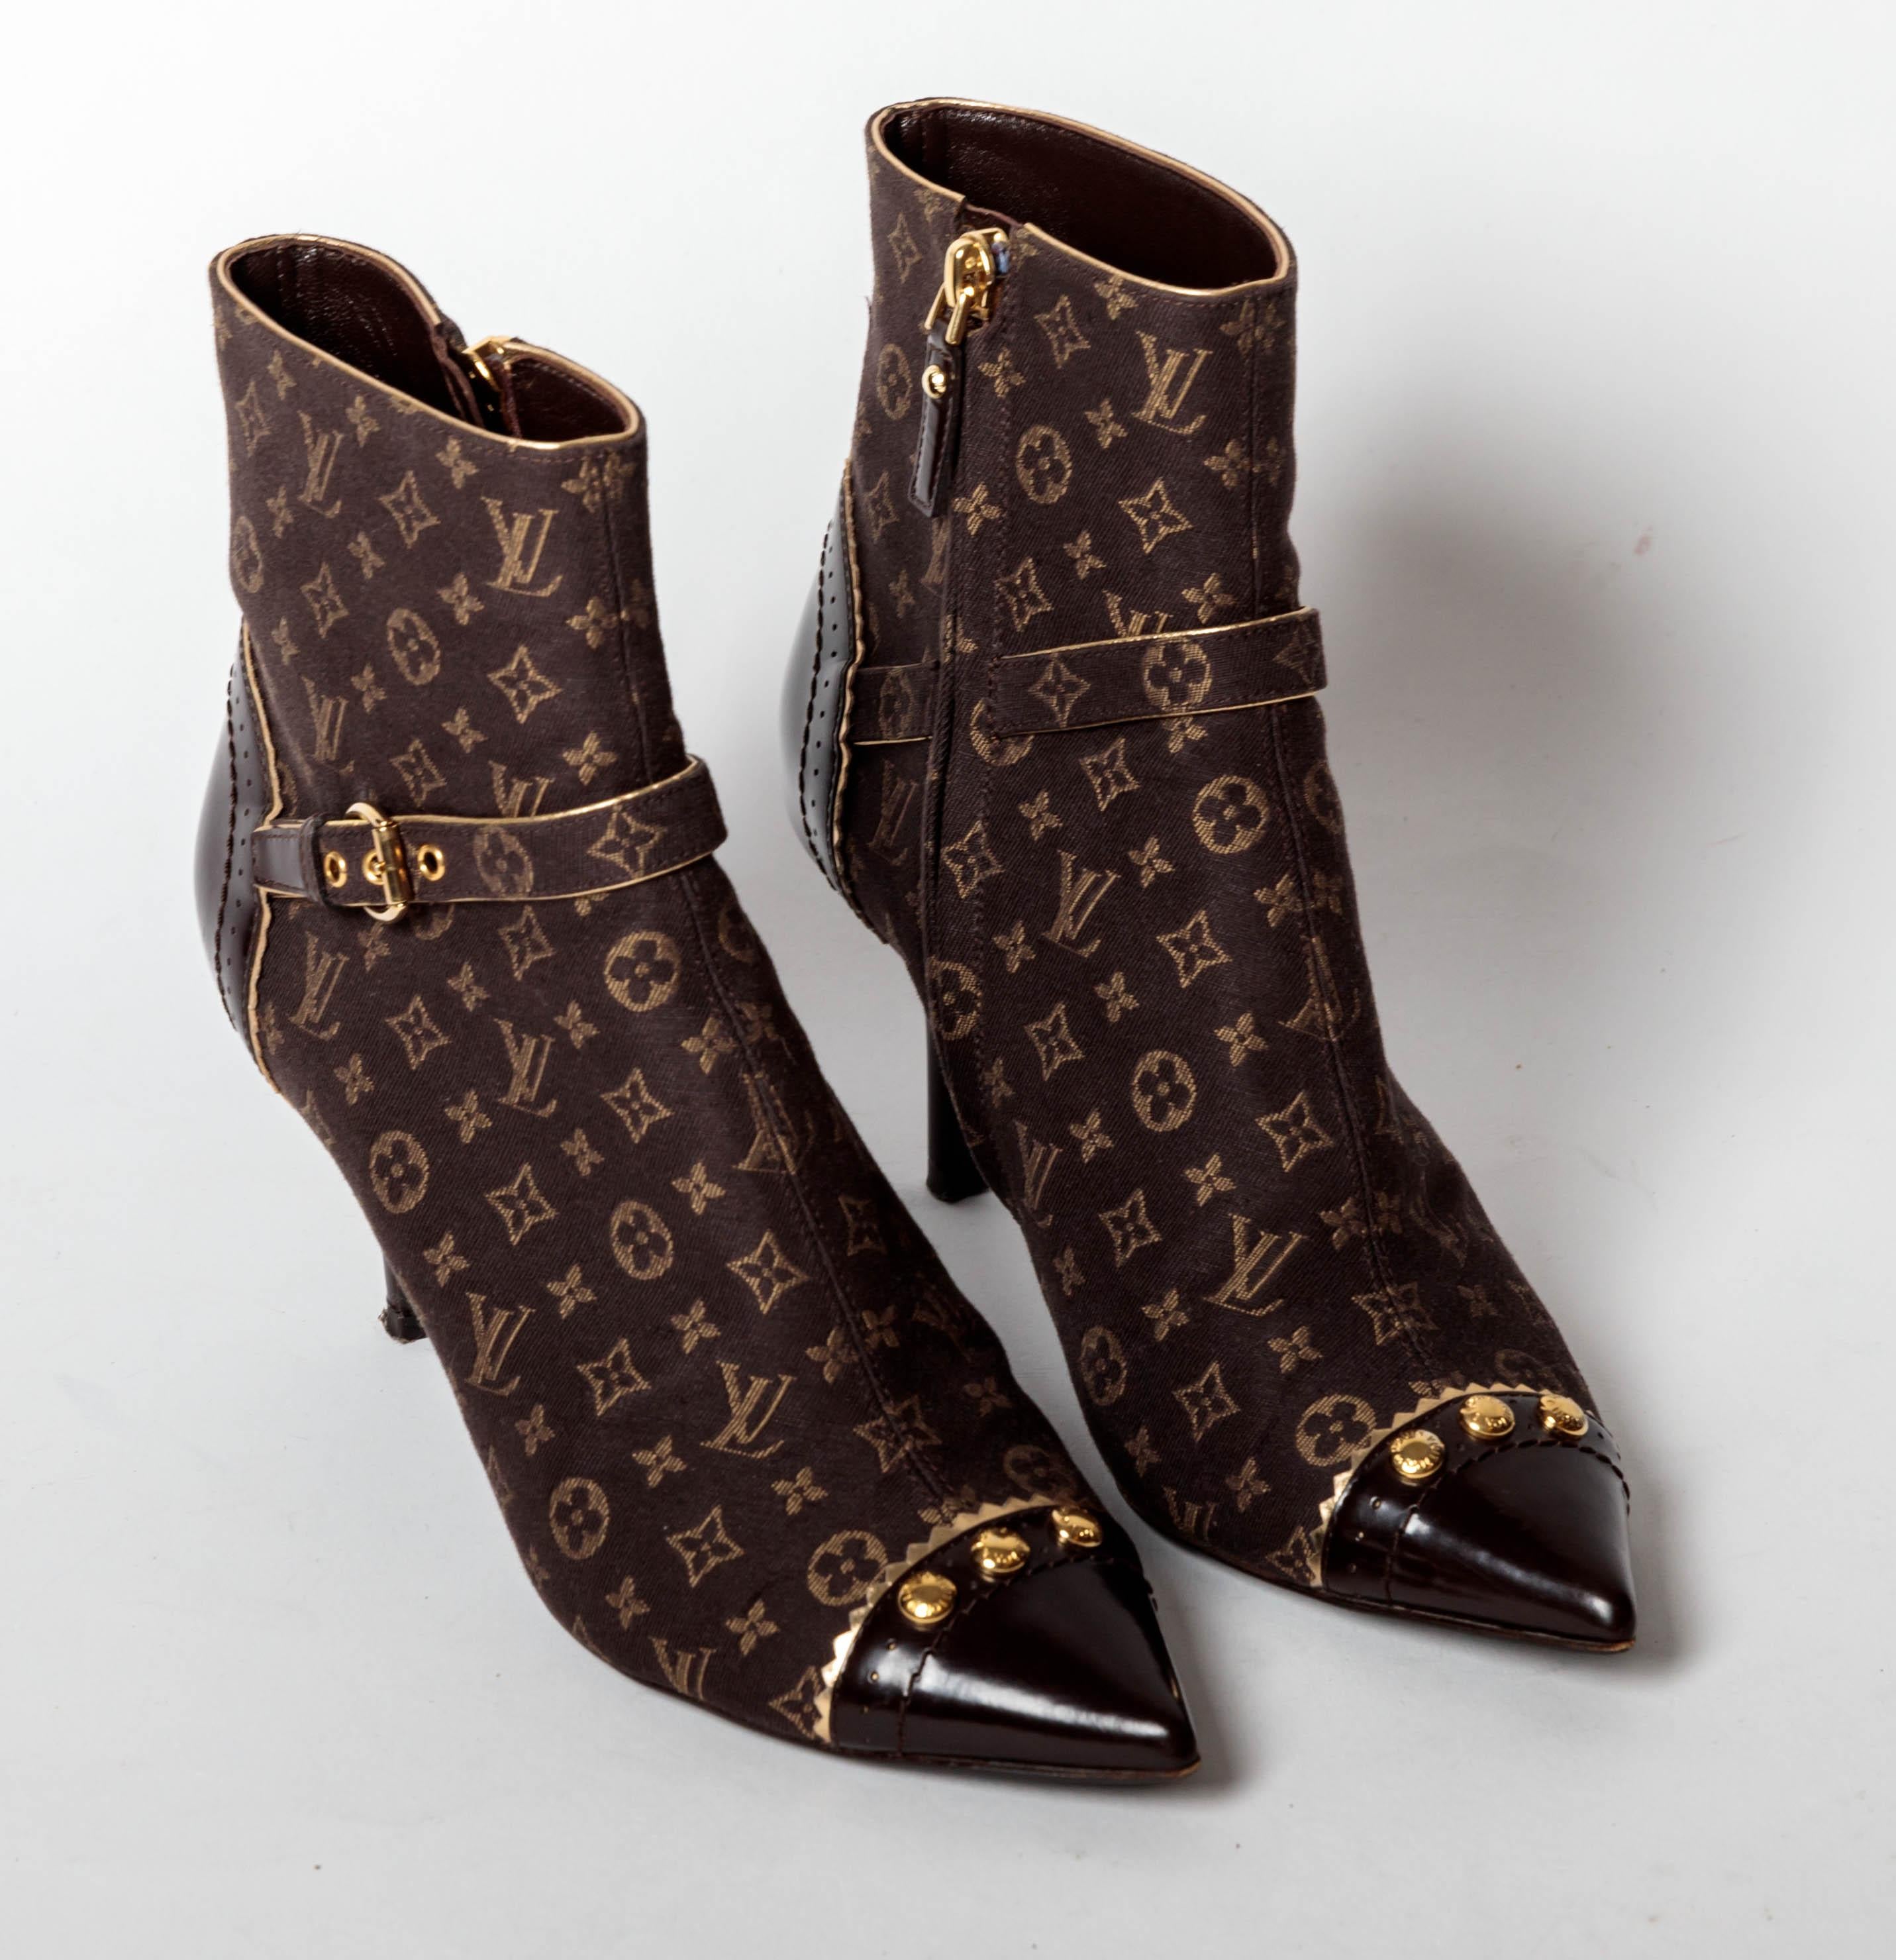 Absolutely adorable Louis Vuitton monogram booties with gold trim.
Worn just a couple of times, these canvas monogram booties have leather pointed toe detail with gold studs, leather heel detail with gold trim and a buckle strap across the top of